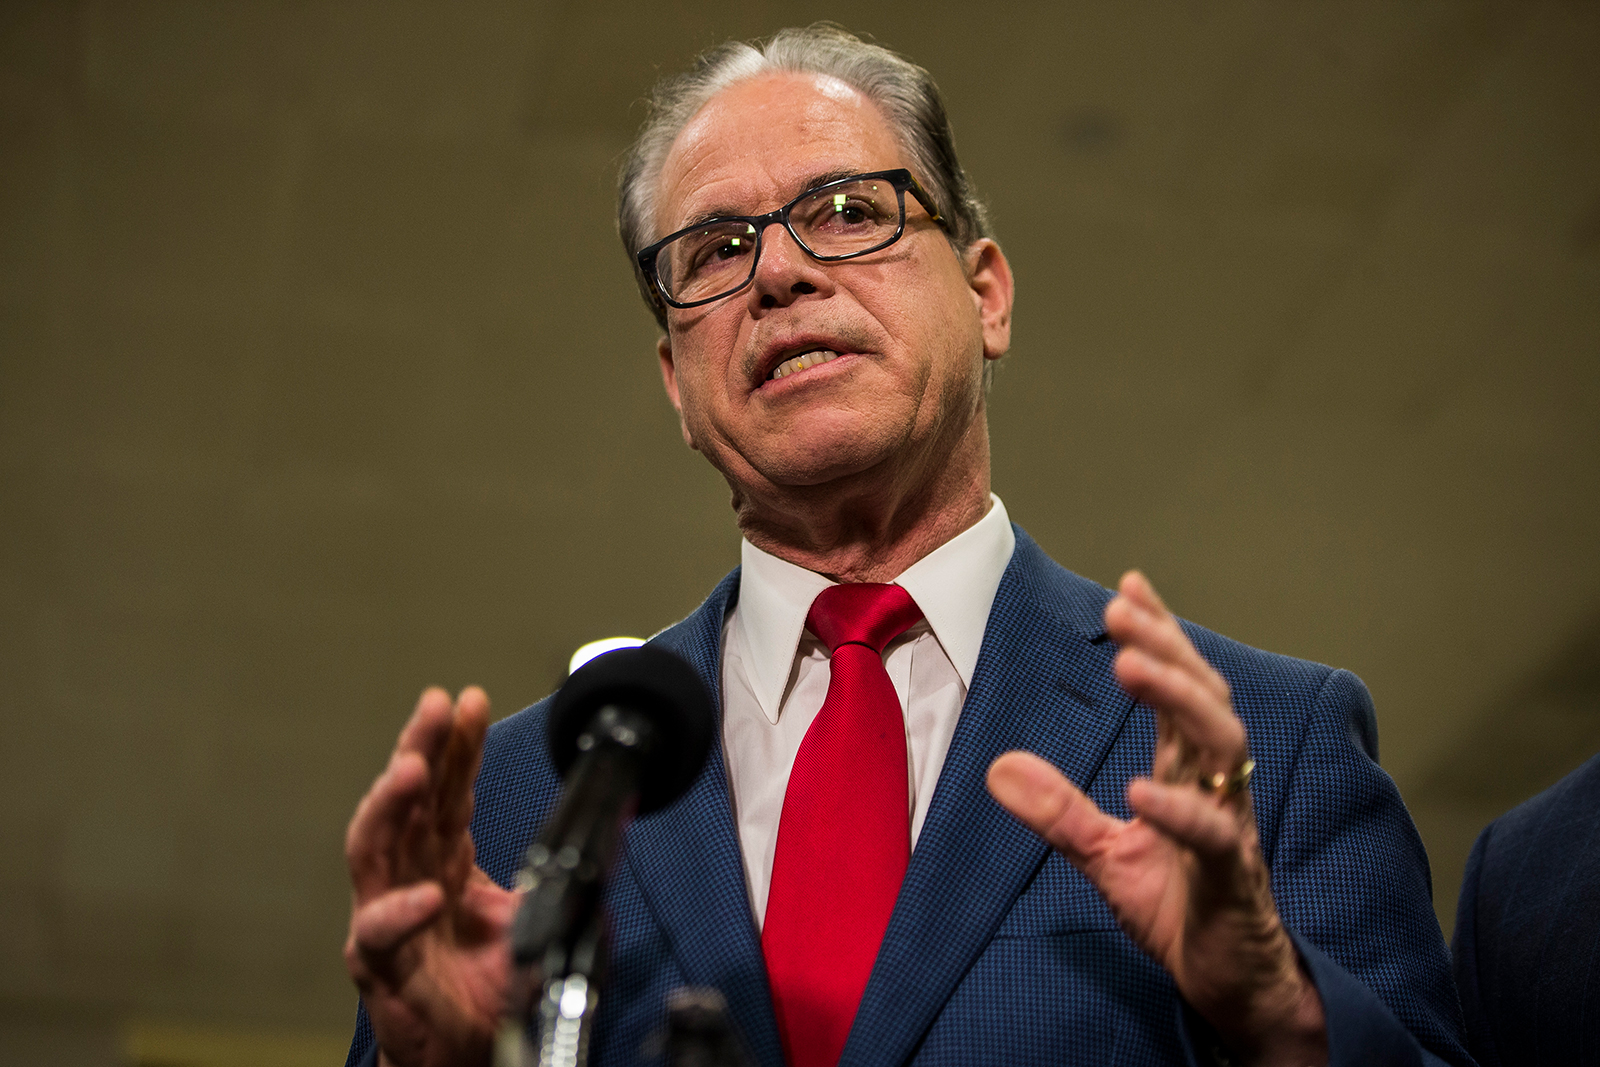 Senator Mike Braun speaks to reporters in the Senate basement at the U.S. Capitol on January 30, in Washington, DC.